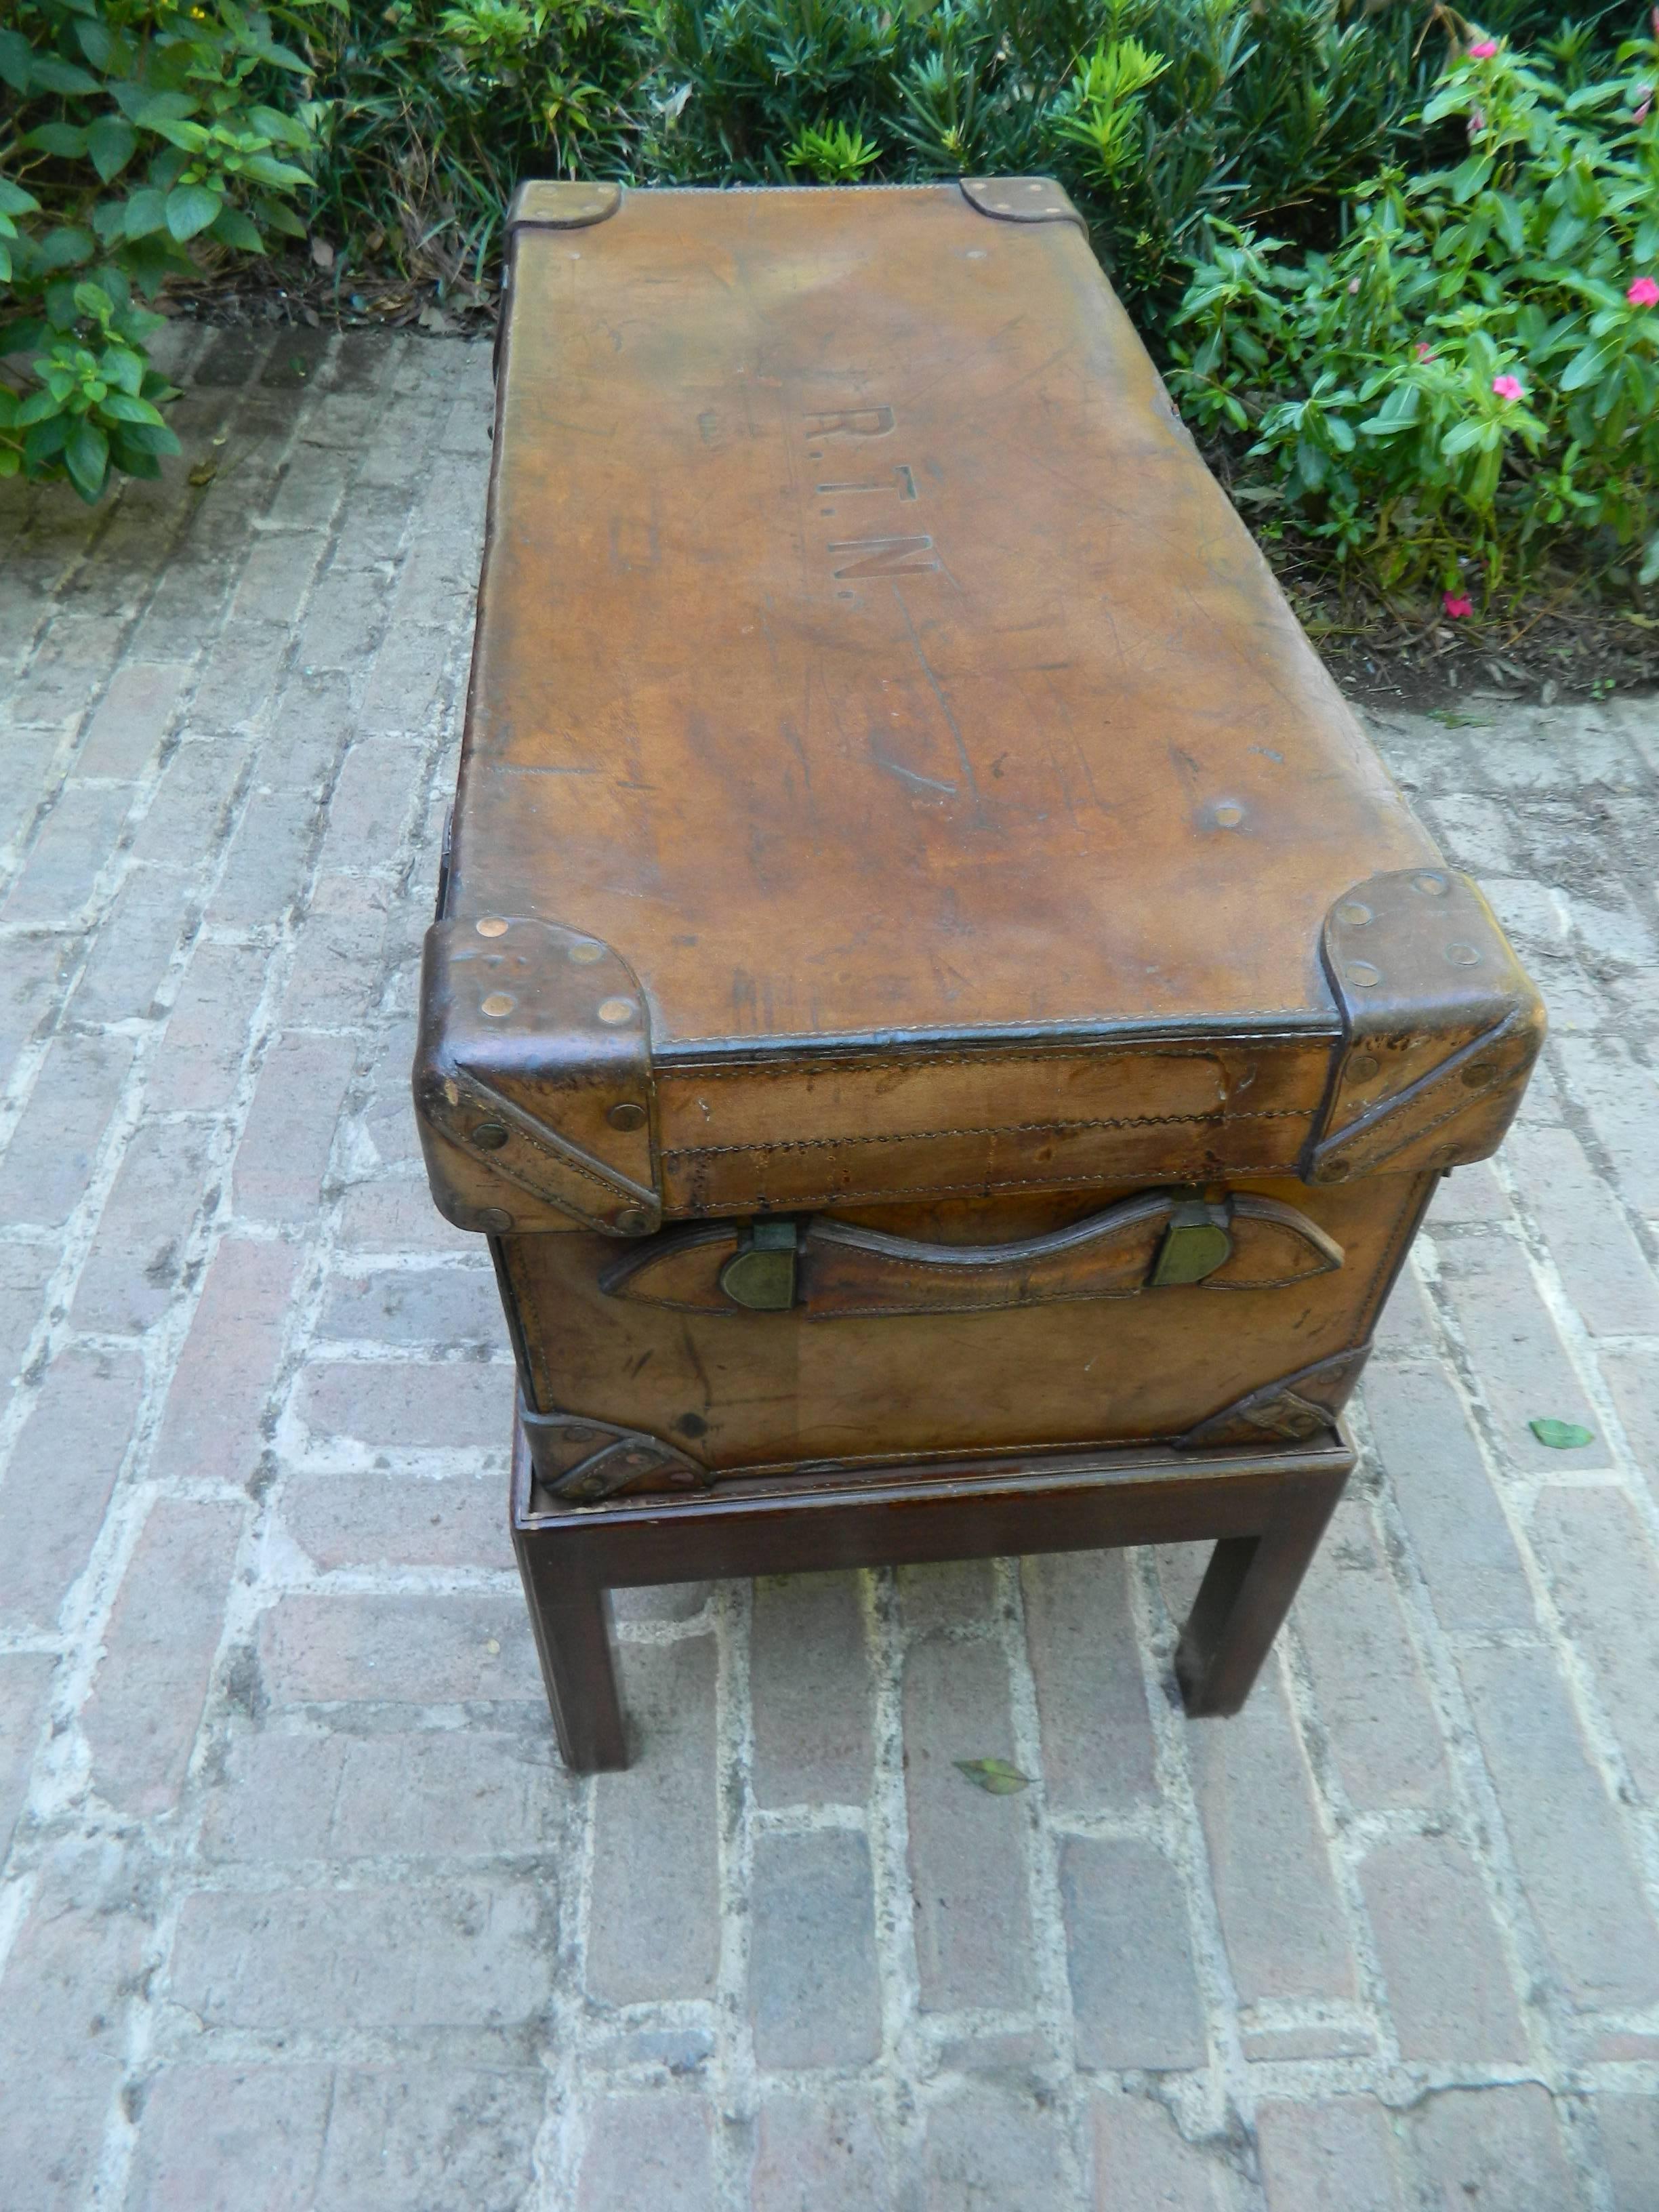 English Leather Trunk Adapted as a Coffee Table on a Wood Base, 19th Century 1